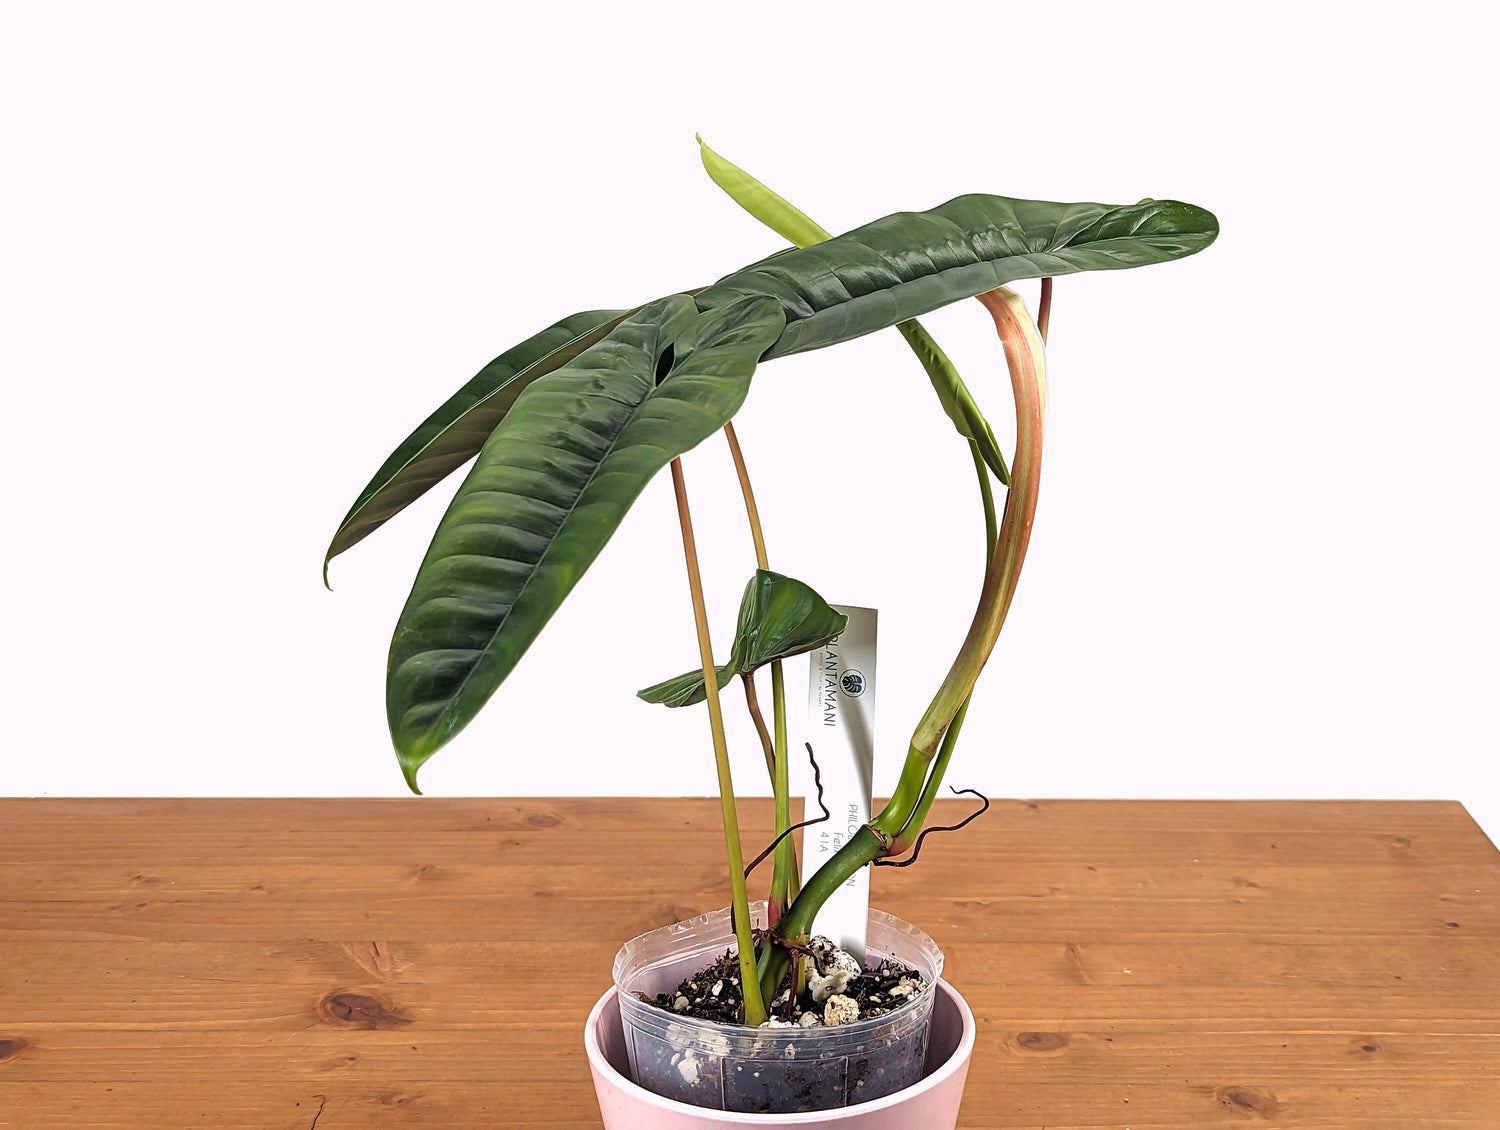 Philodendron Felix Exact Plant Pictured 4 Inch Pot